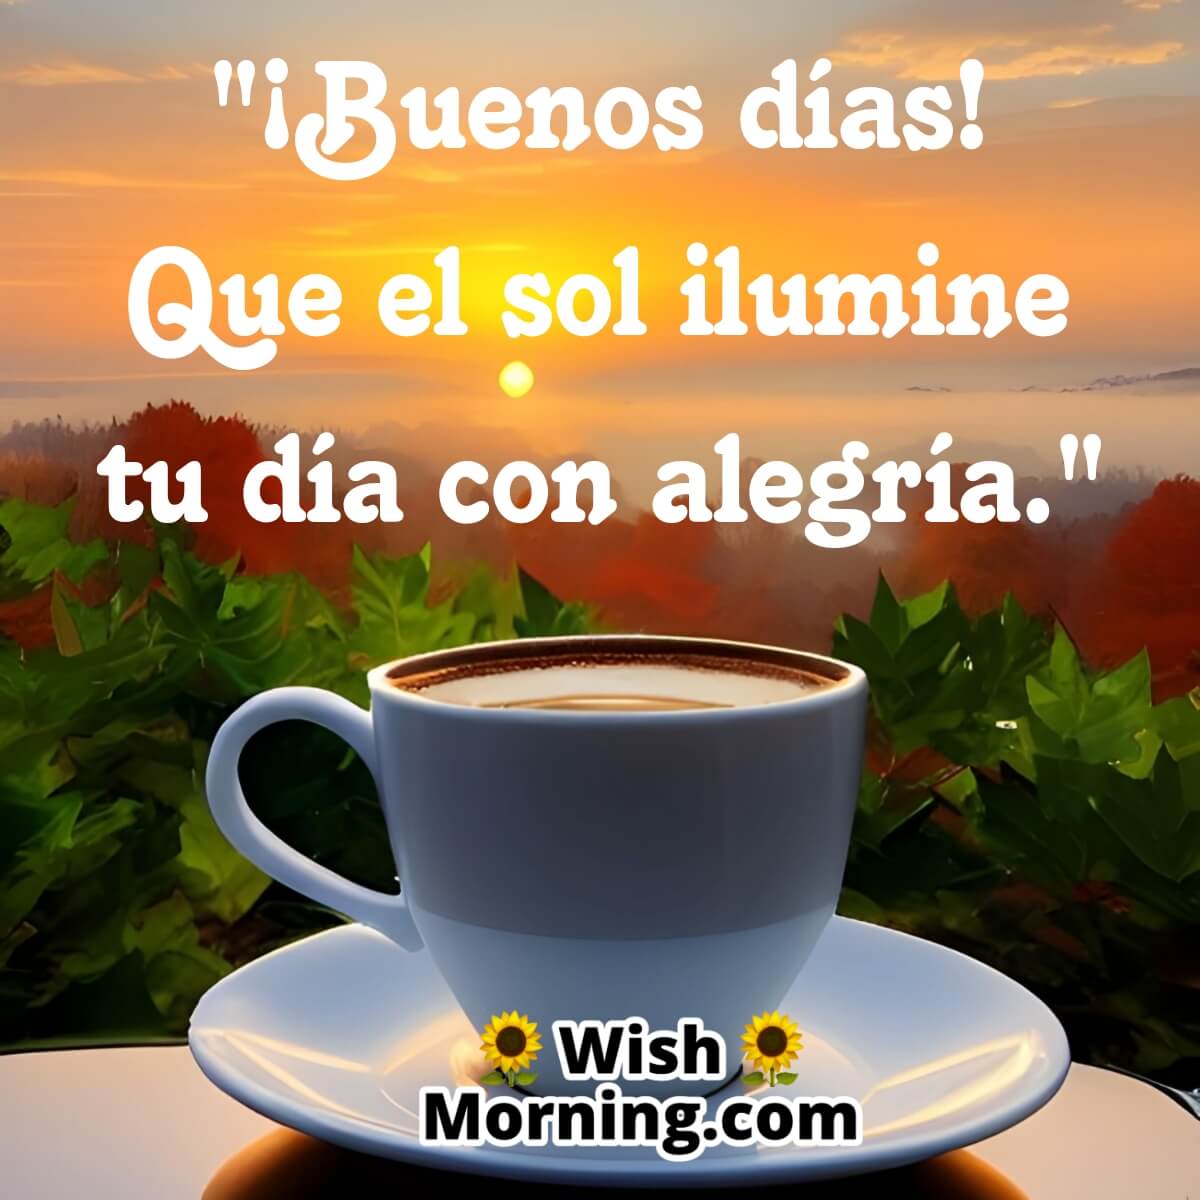 Good Morning Wishes In Spanish.